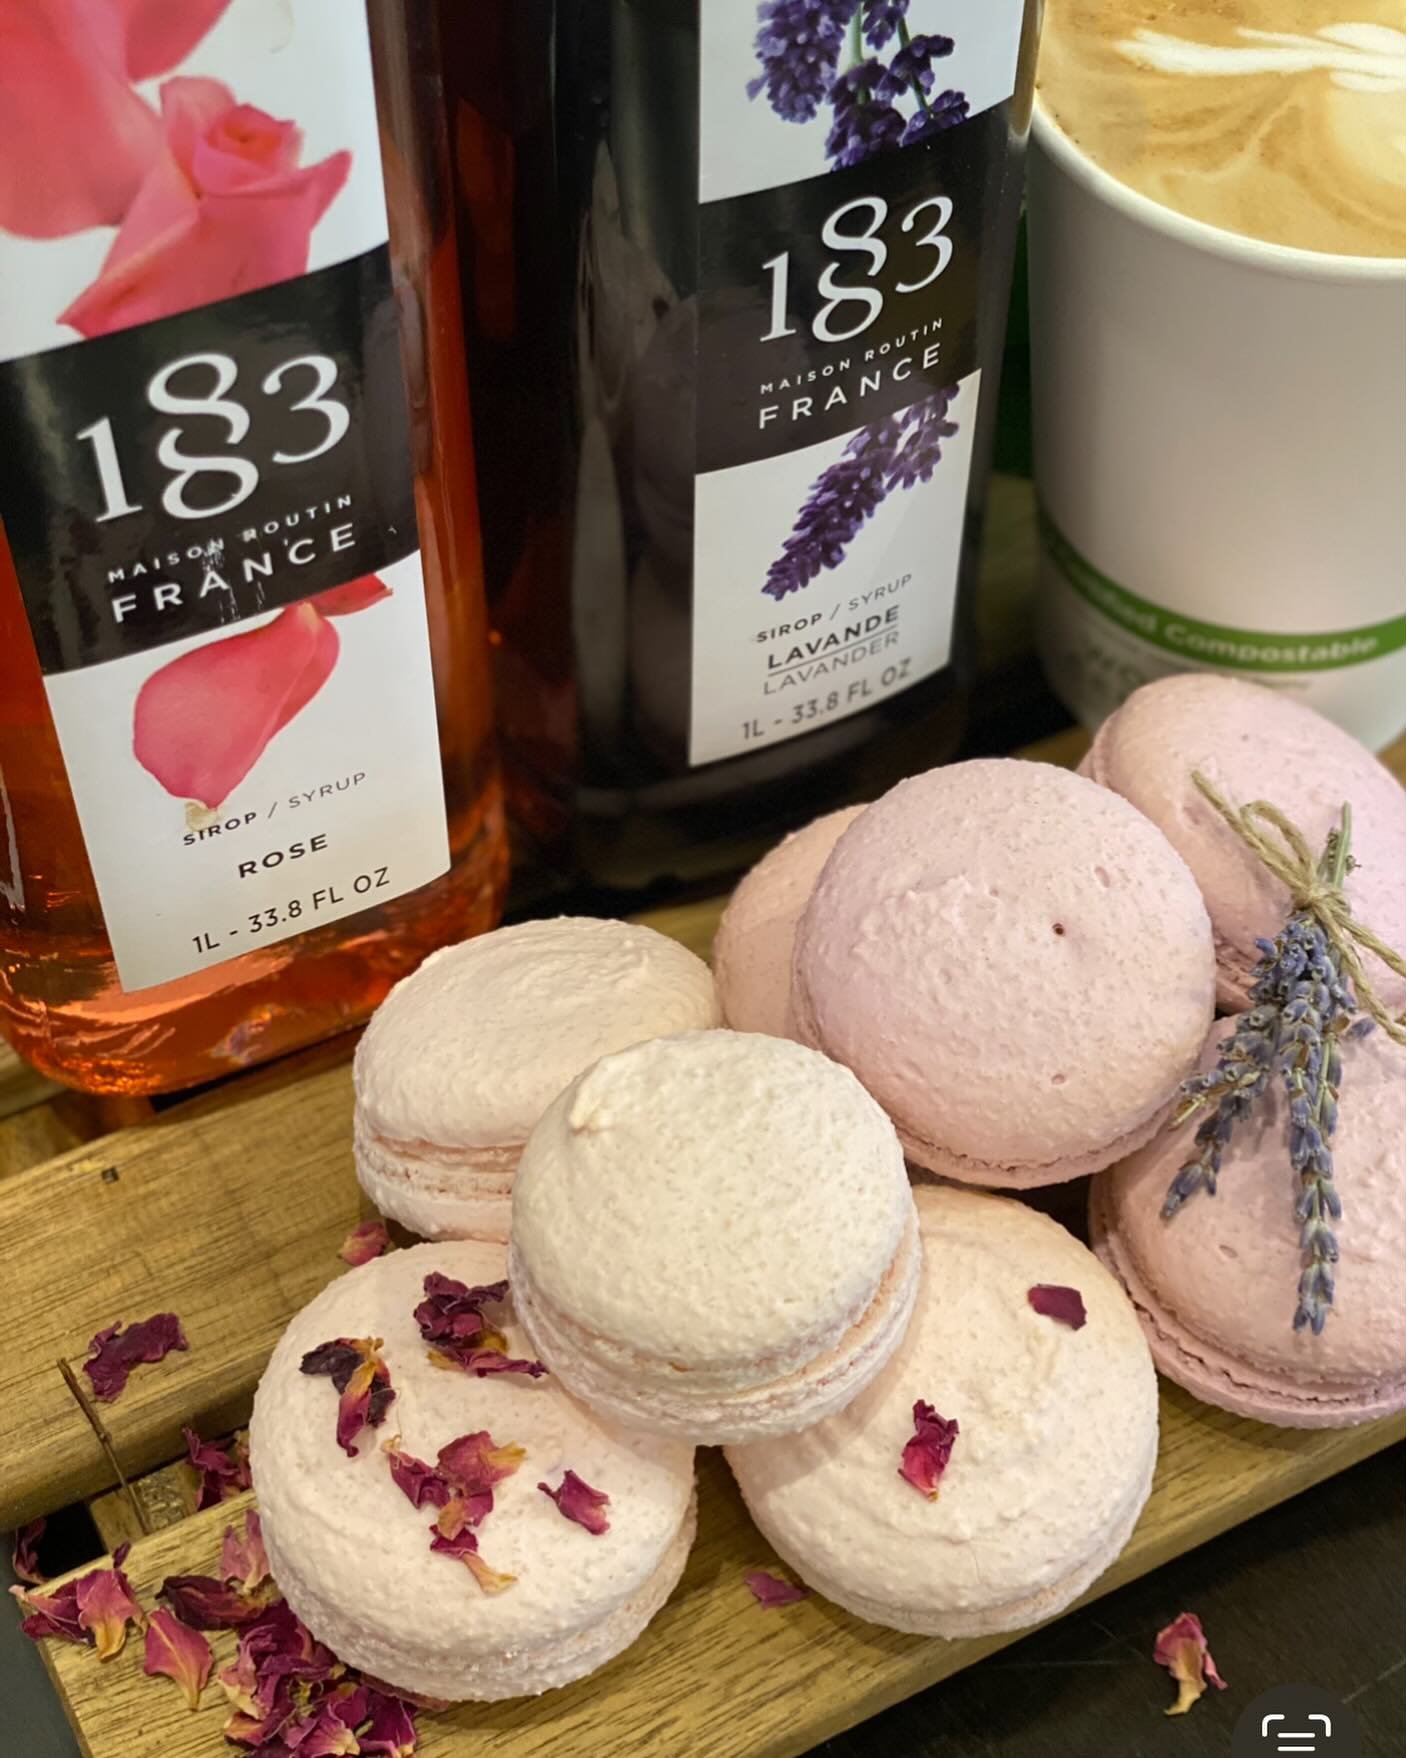 Our Rose and lavender macarons are back!! Jump into Spring and try them with our Rose or Lavender flavored latt&eacute; for the perfect pairing #macarons #macaron #bestmacaronsintown #newjersey #chathamnj #summitnj #shorthillsnj #madisonnj #milburnnj